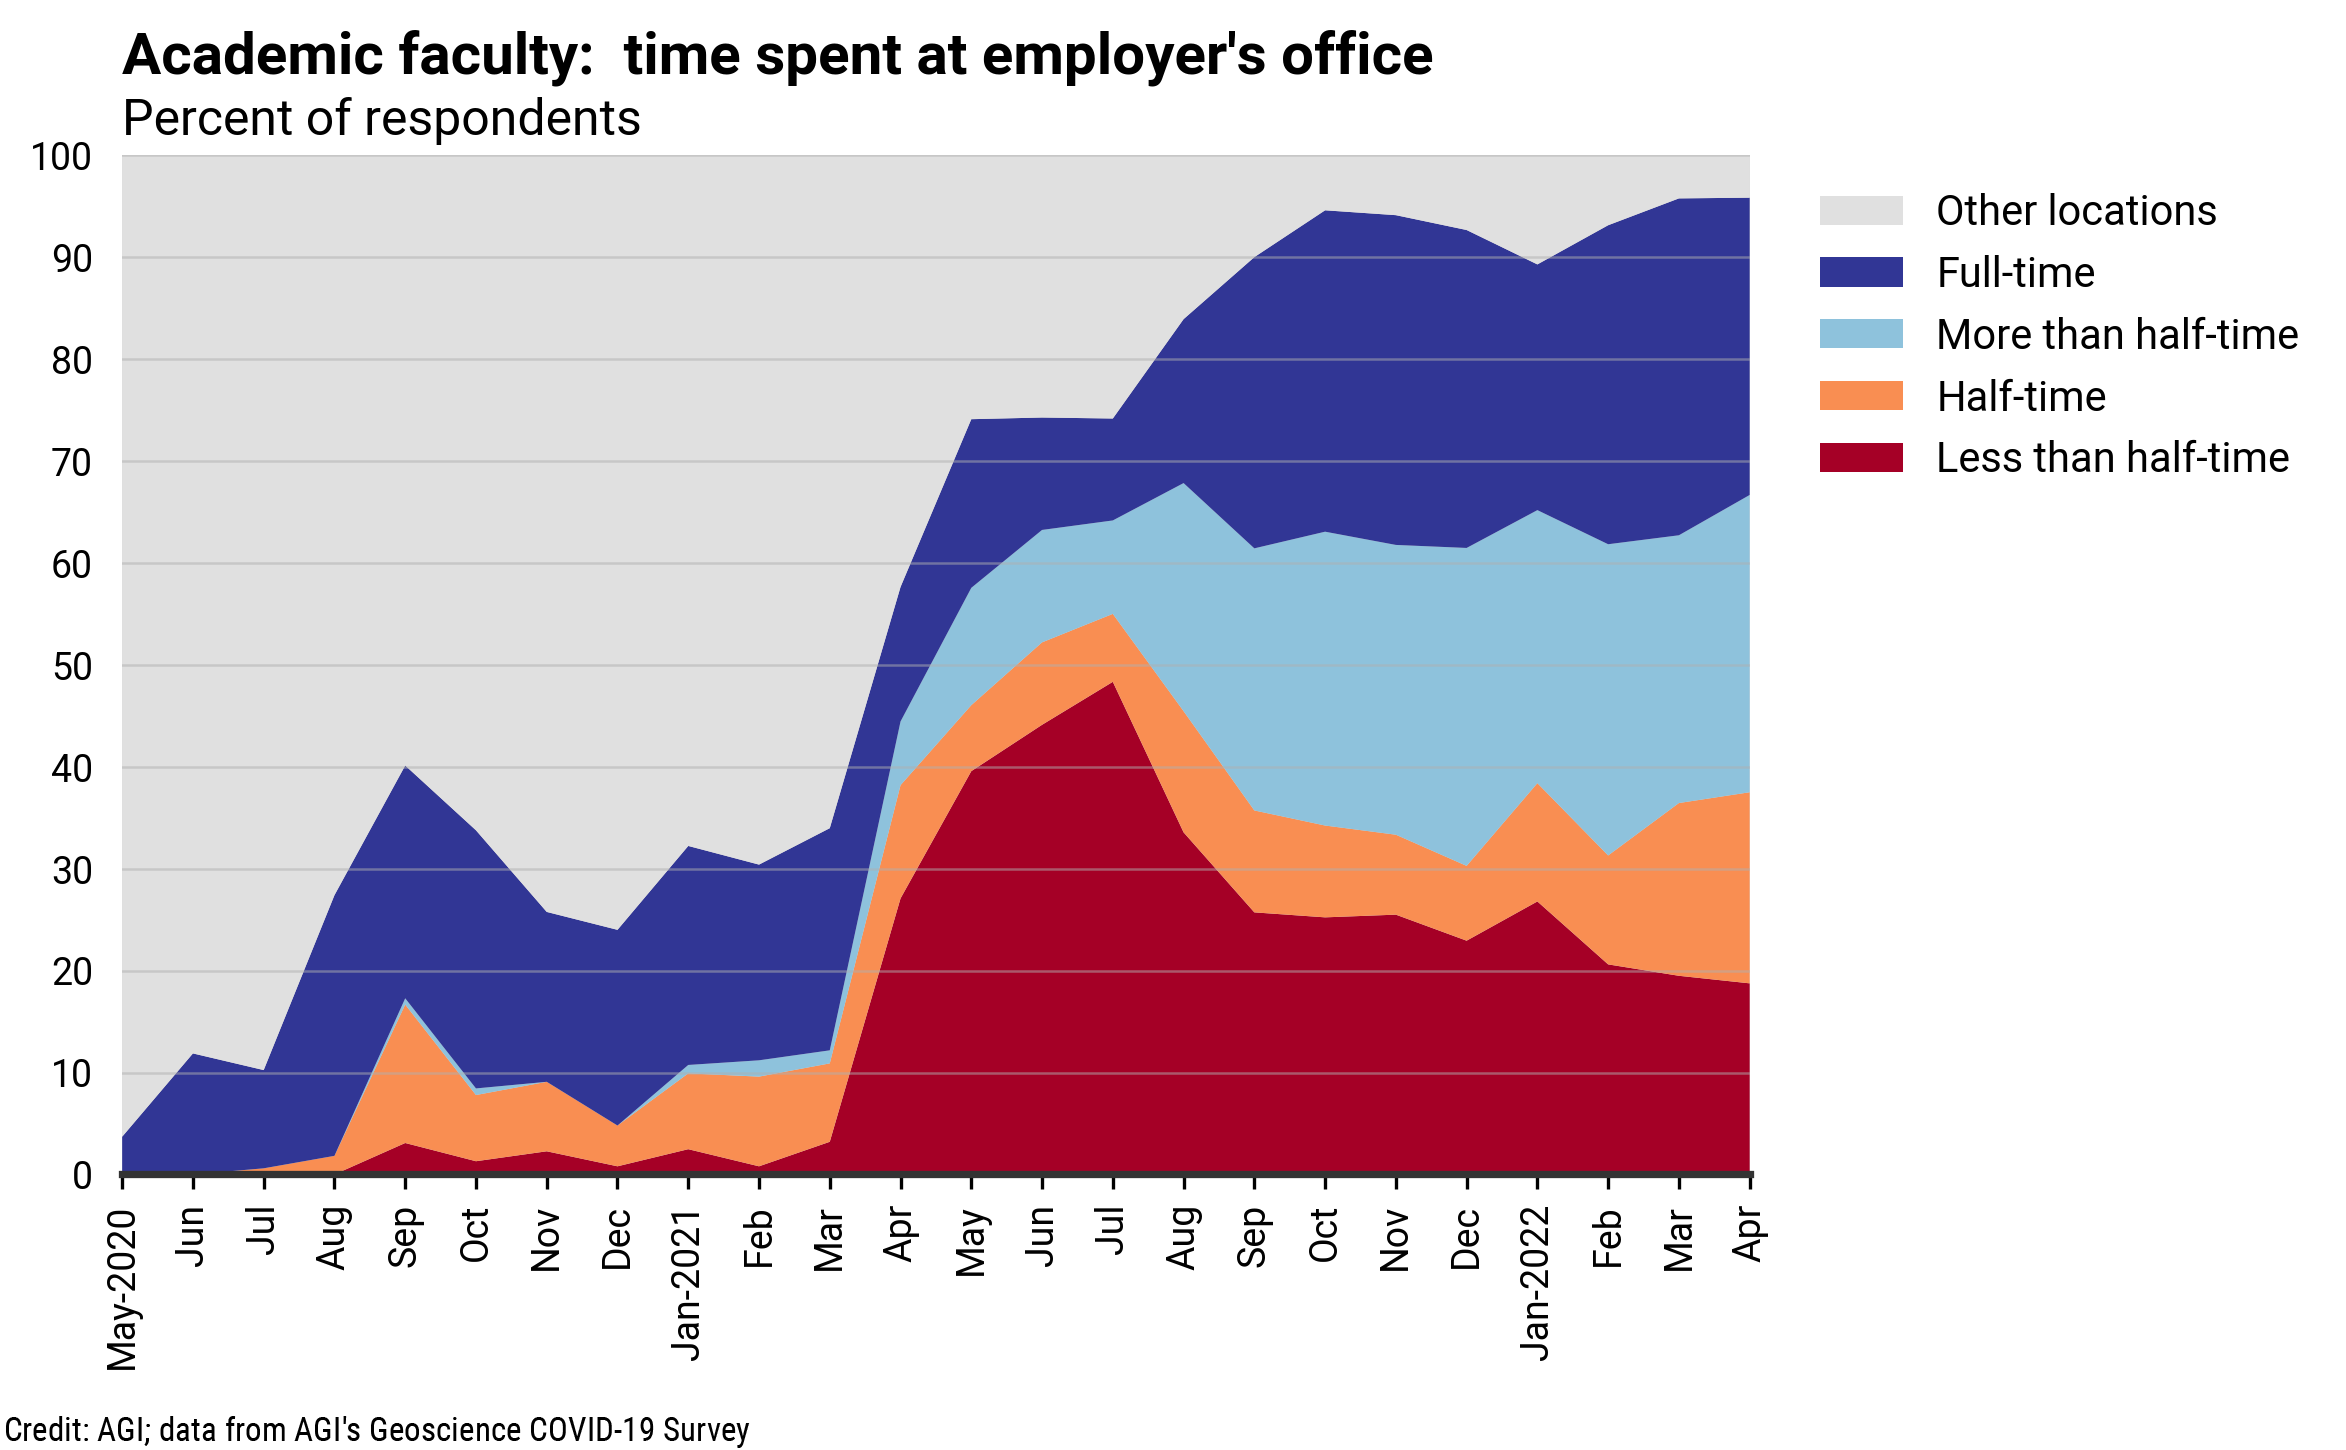 DB_2022-006 chart 03: Academic faculty: time spent at employer's office (Credit: AGI; data from AGI's Geoscience COVID-19 Survey)